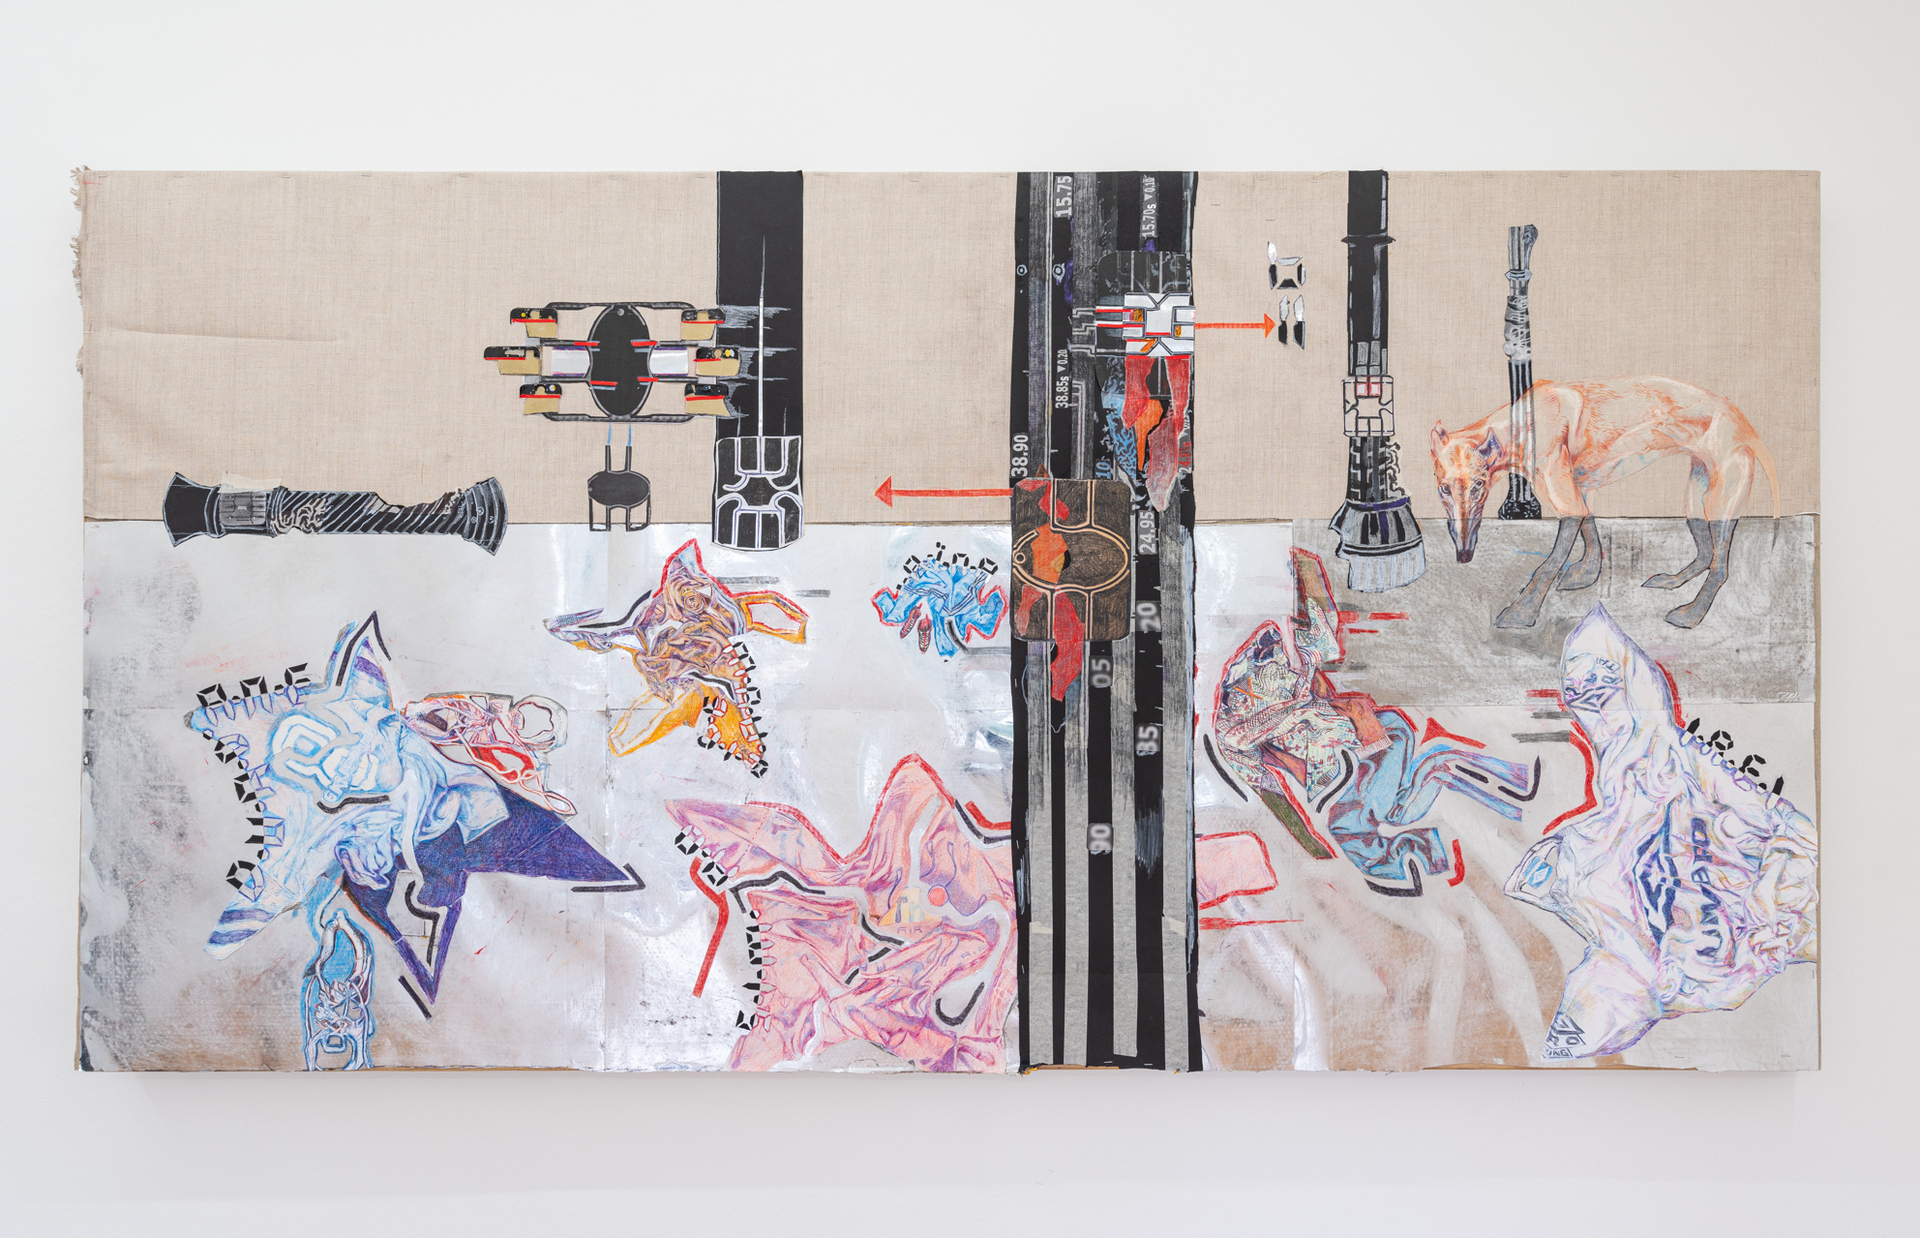 Anna Solal, "Clothes", 2022, drawing, mixed media on wood, 119 x 234 x 6 cm